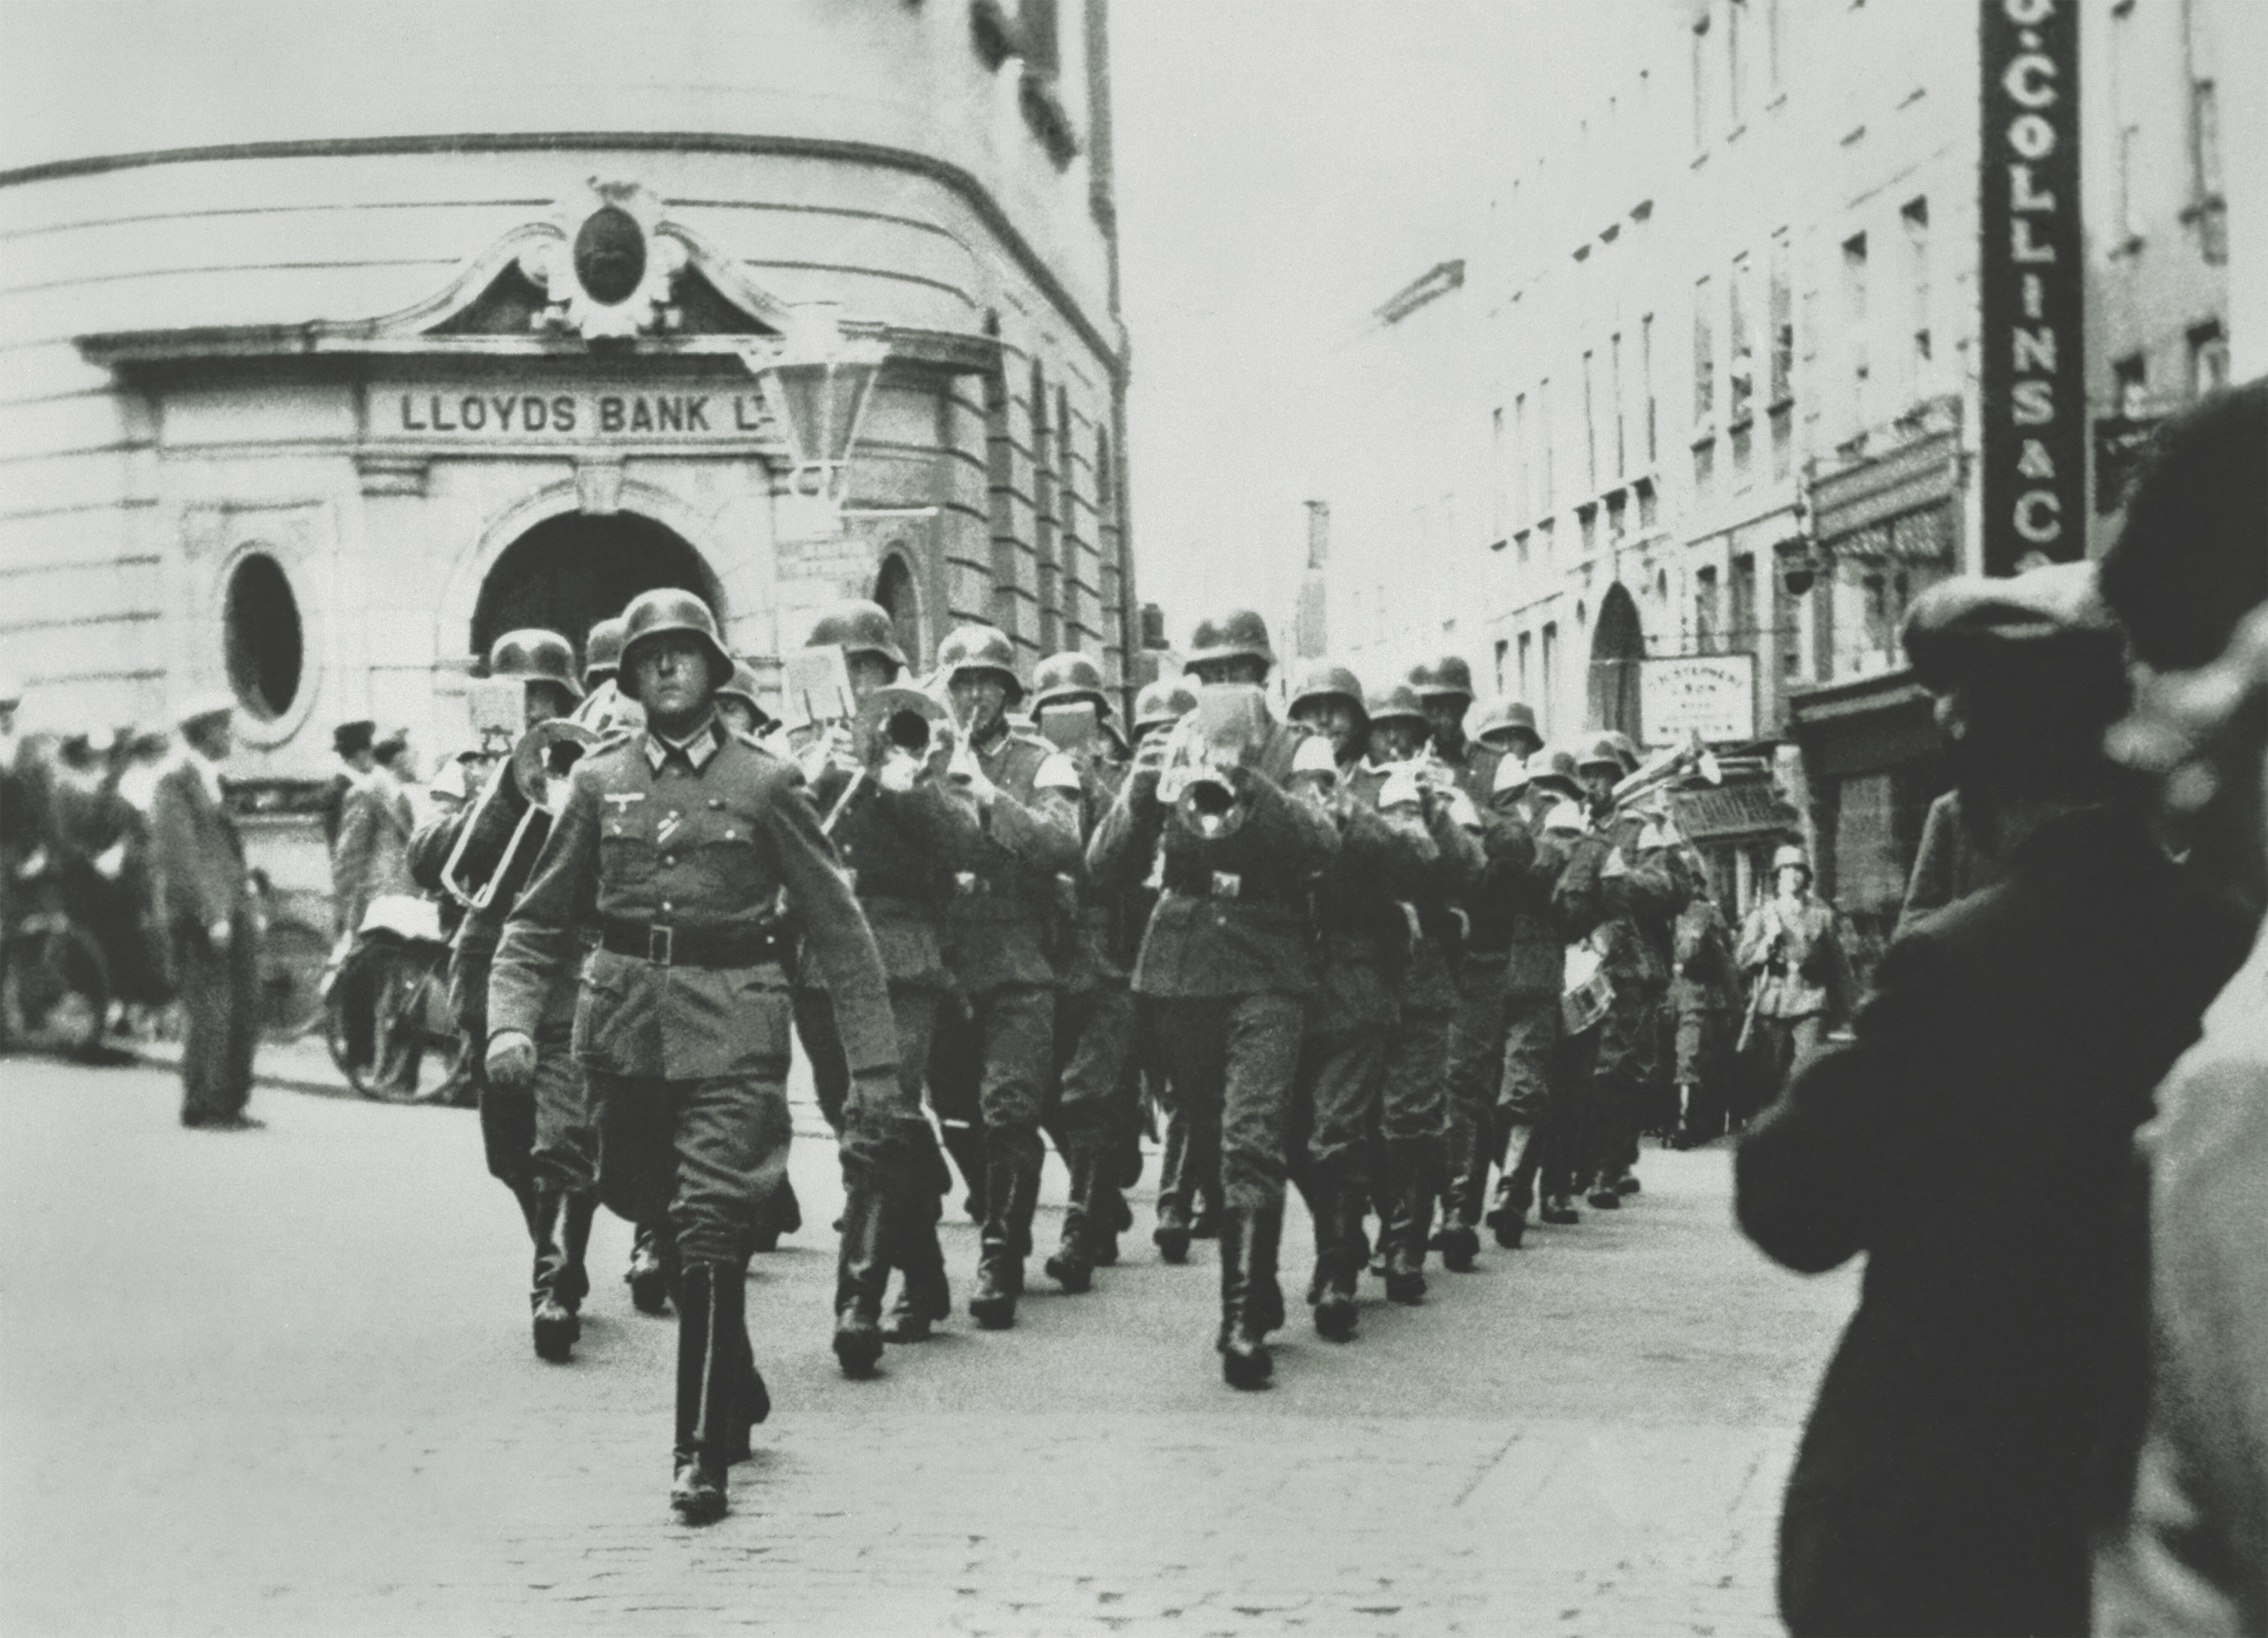 A German military band marchews past a branch of Lloyds Bank on The Pollet, one of the main streets in the capital of Saint Peter Port, Guernsey, during the Nazi occupation of the Channel Islands in World War II. (Imperial War Museums)